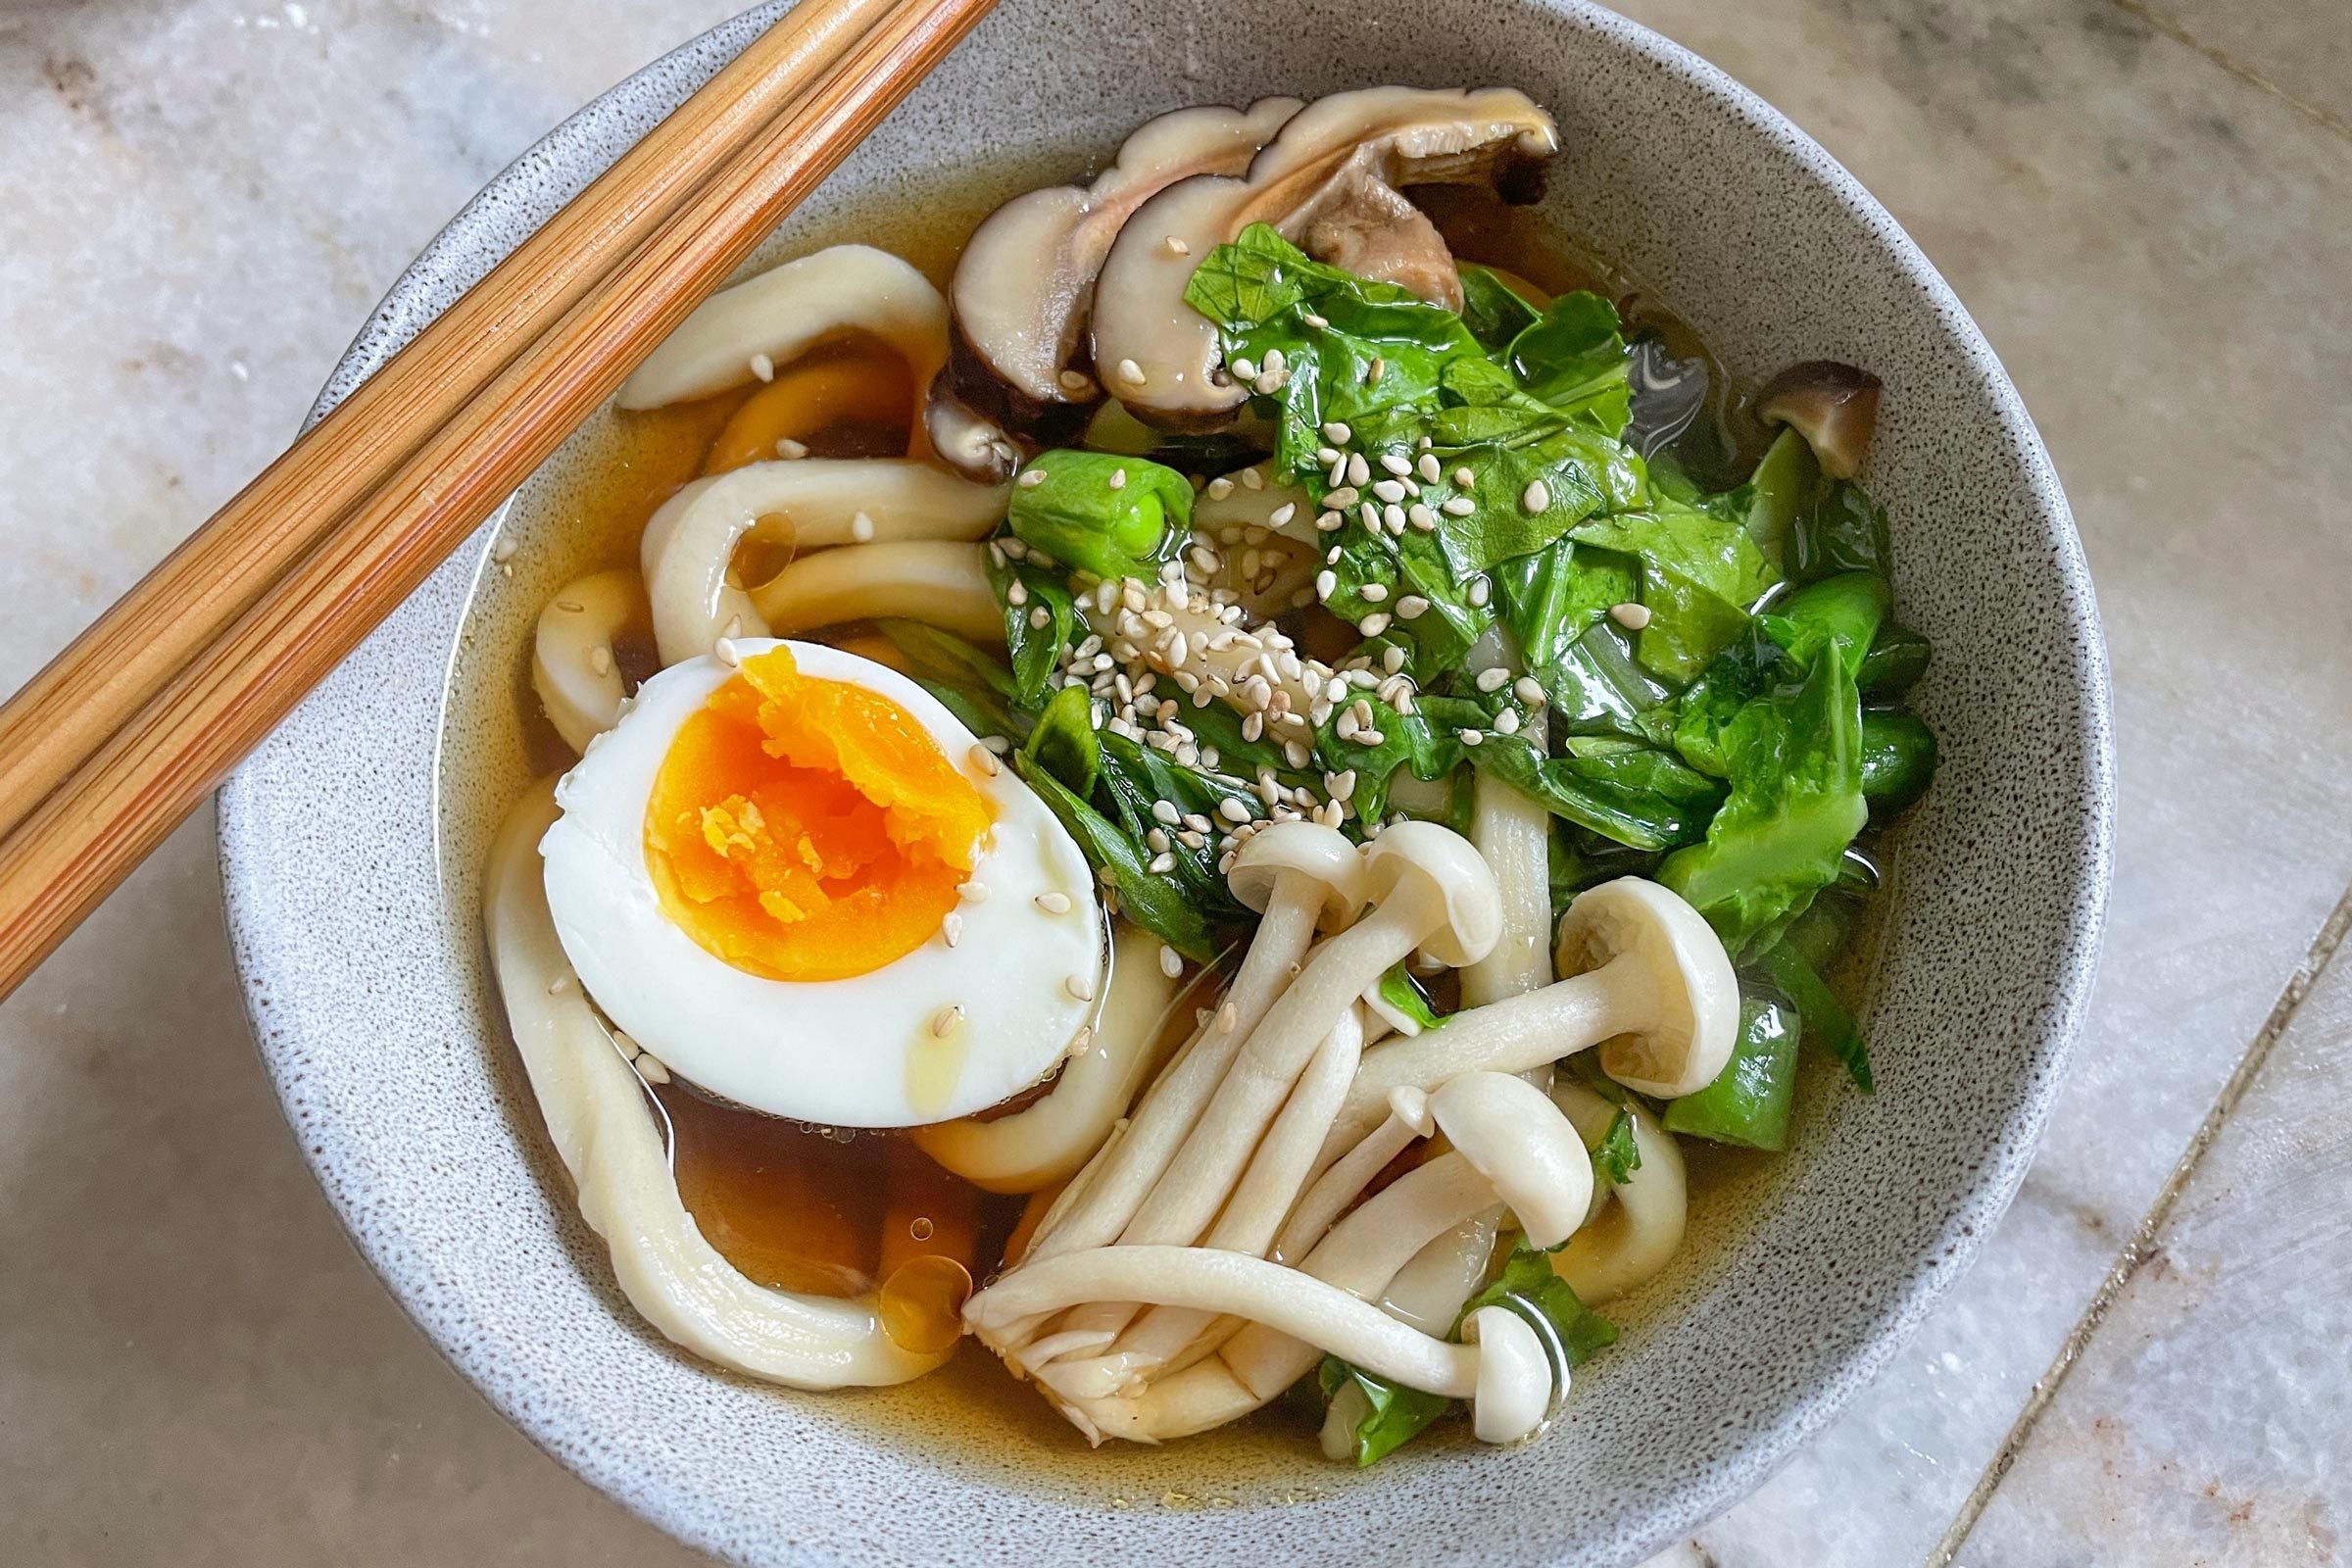 How To Make Udon Noodles From Scratch Step By Step